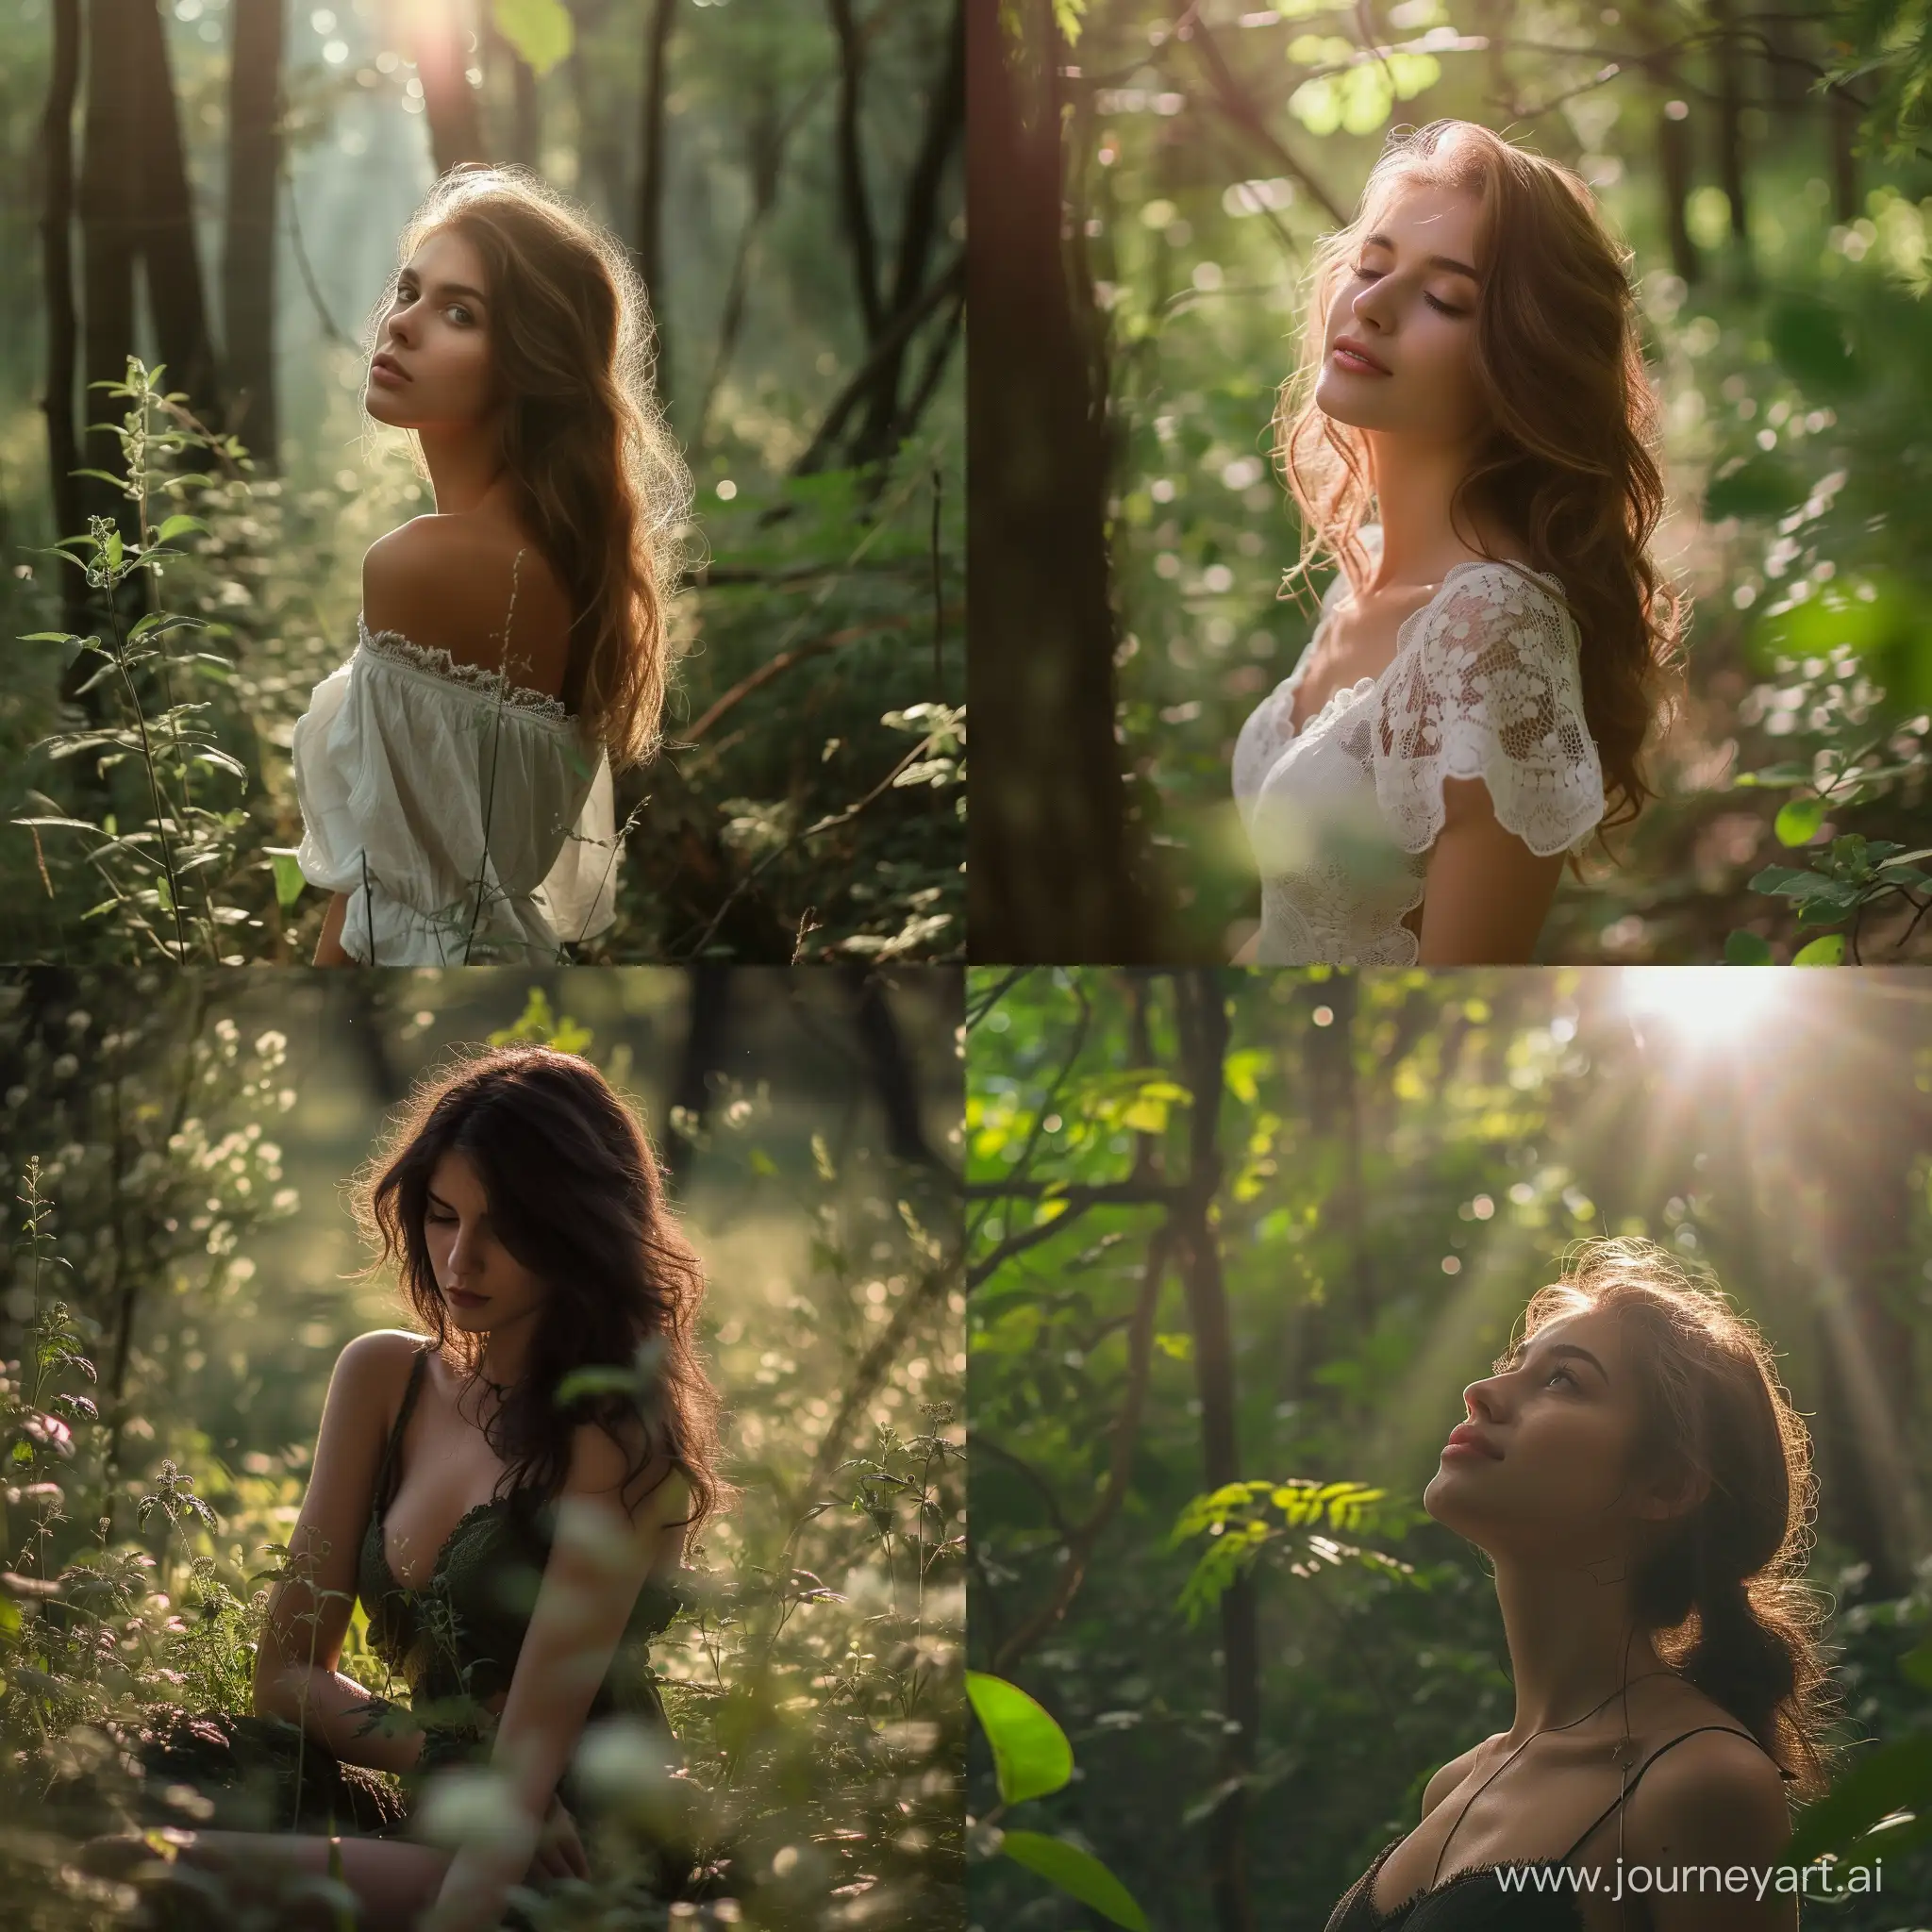 A beautiful woman in forest fresh morning dreamy environment 